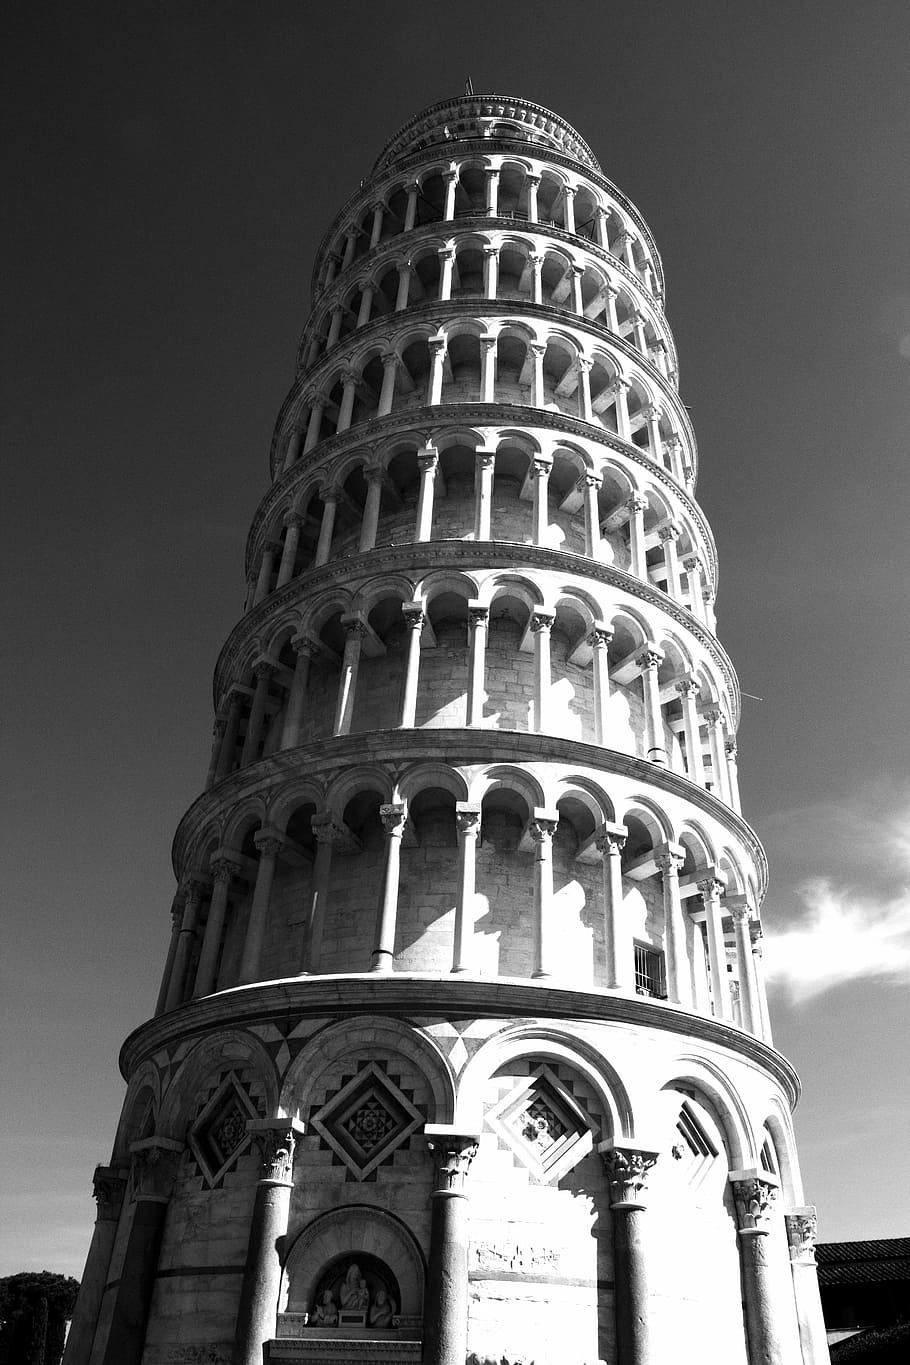 pisa, torre, tuscany, monument, works, culture, tourism, italy